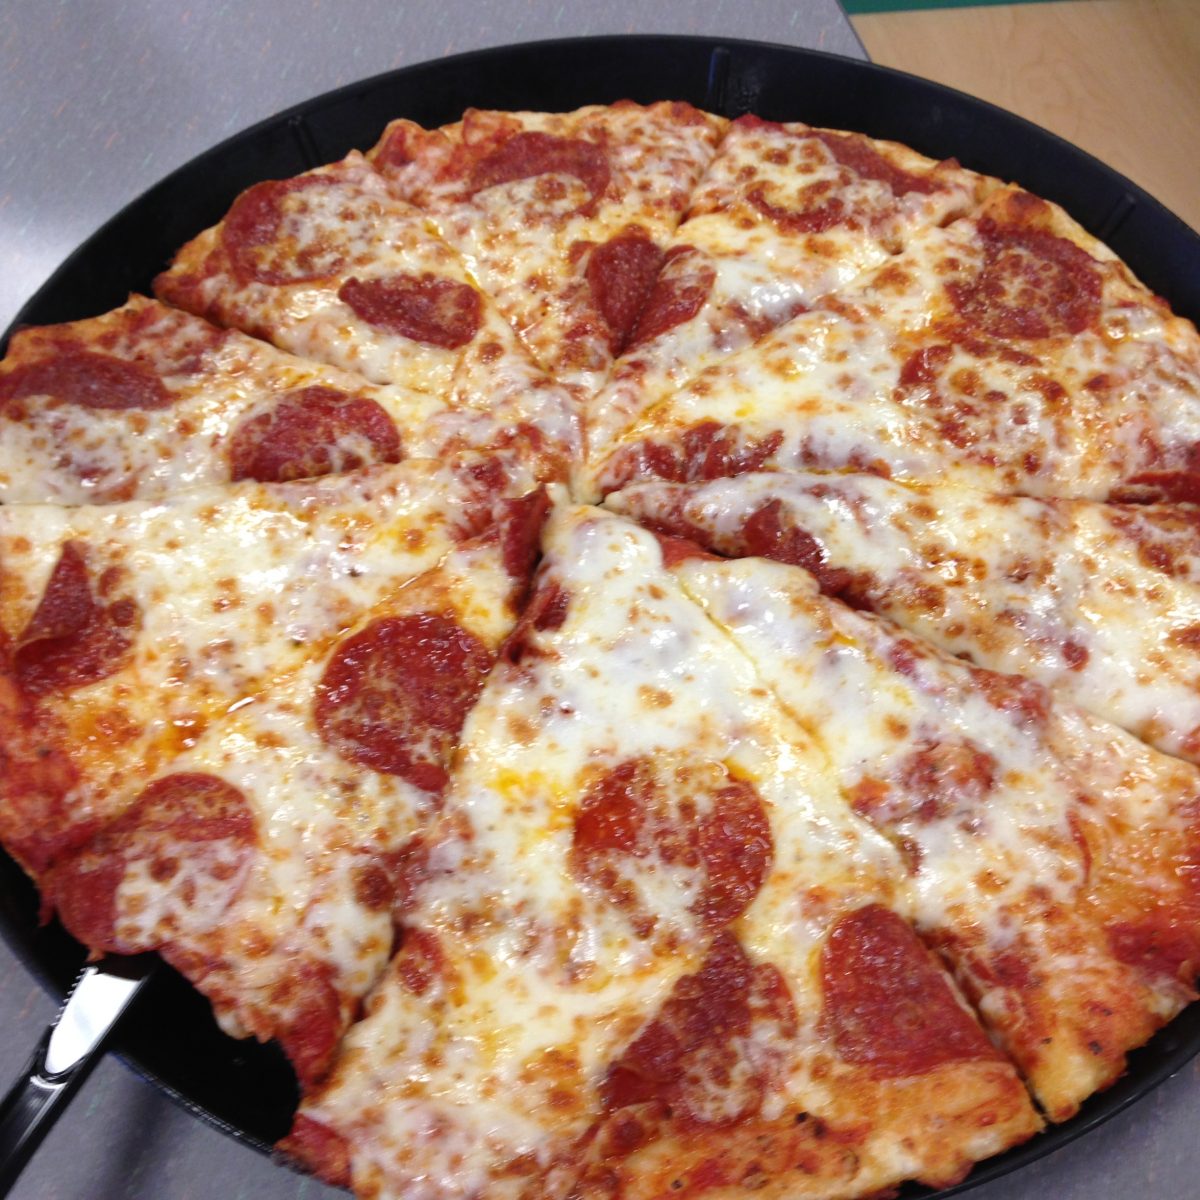 Is Chuck E. Cheese's Pizza Recycled? - Truth or Fiction?